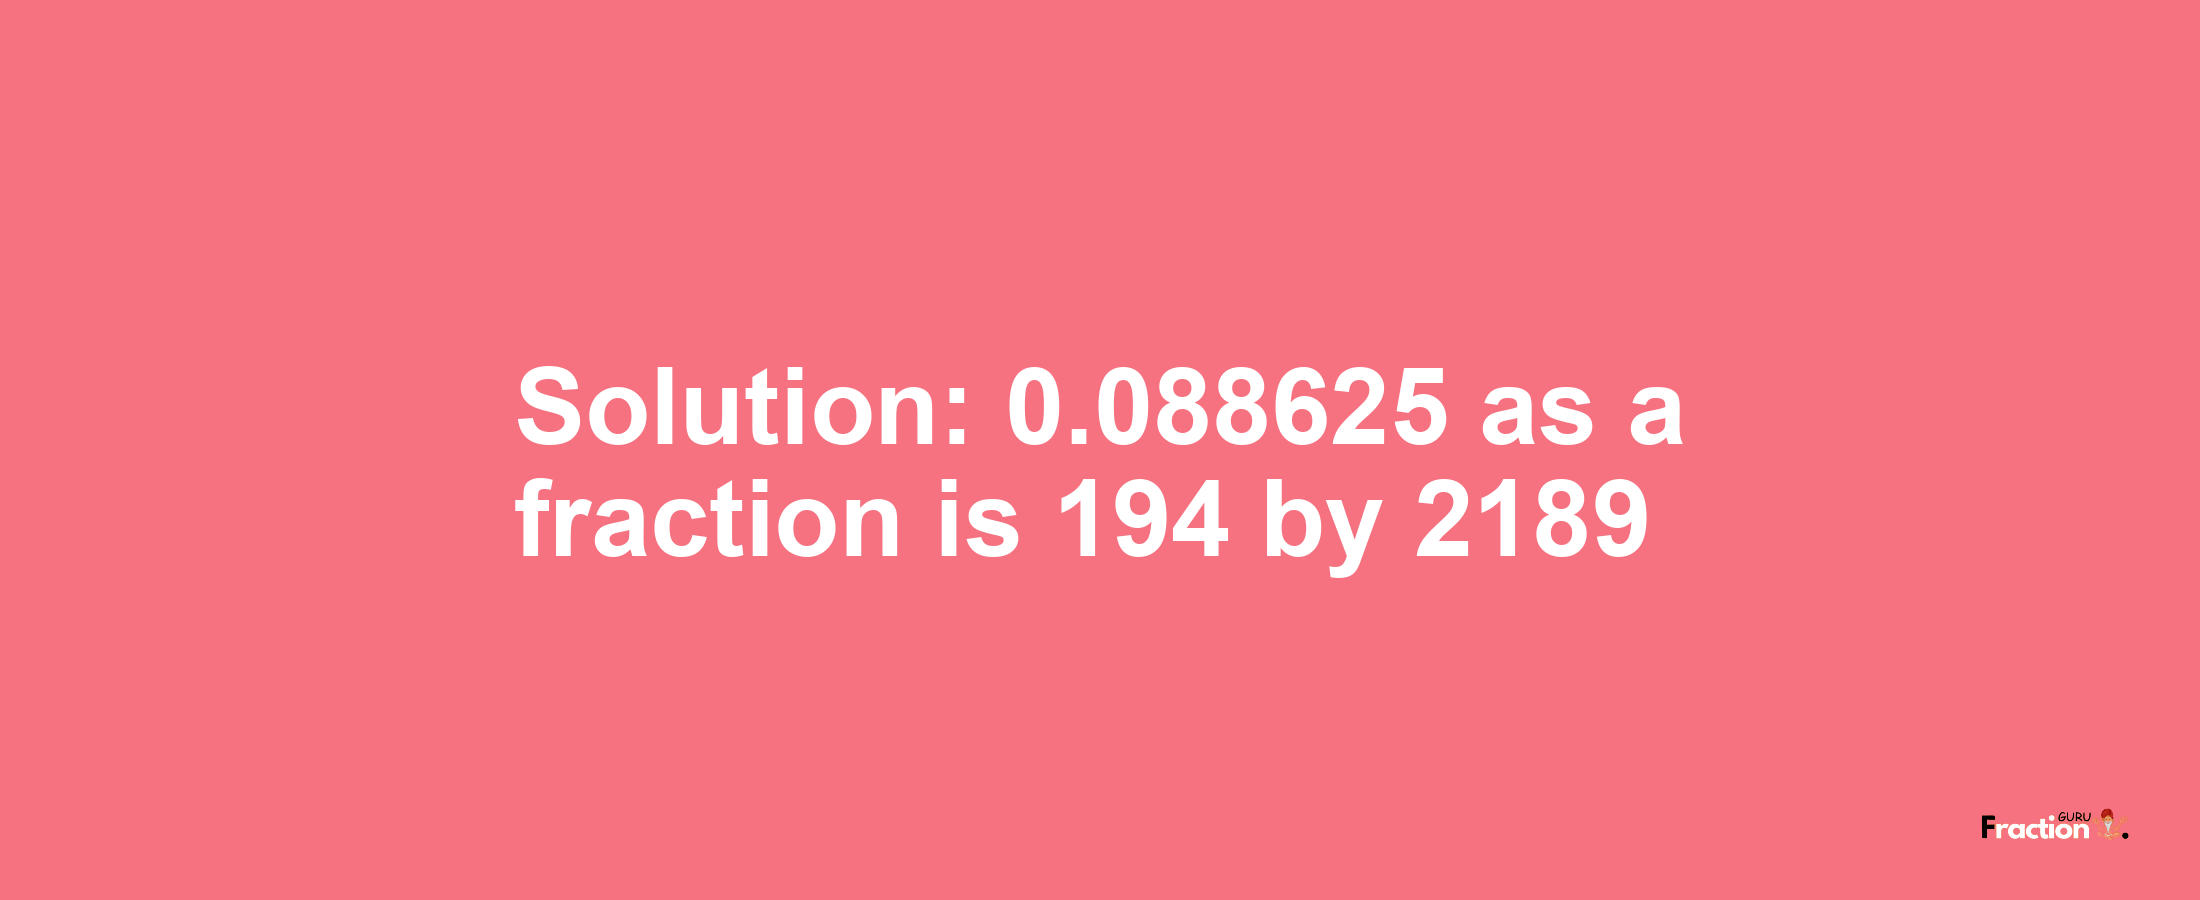 Solution:0.088625 as a fraction is 194/2189